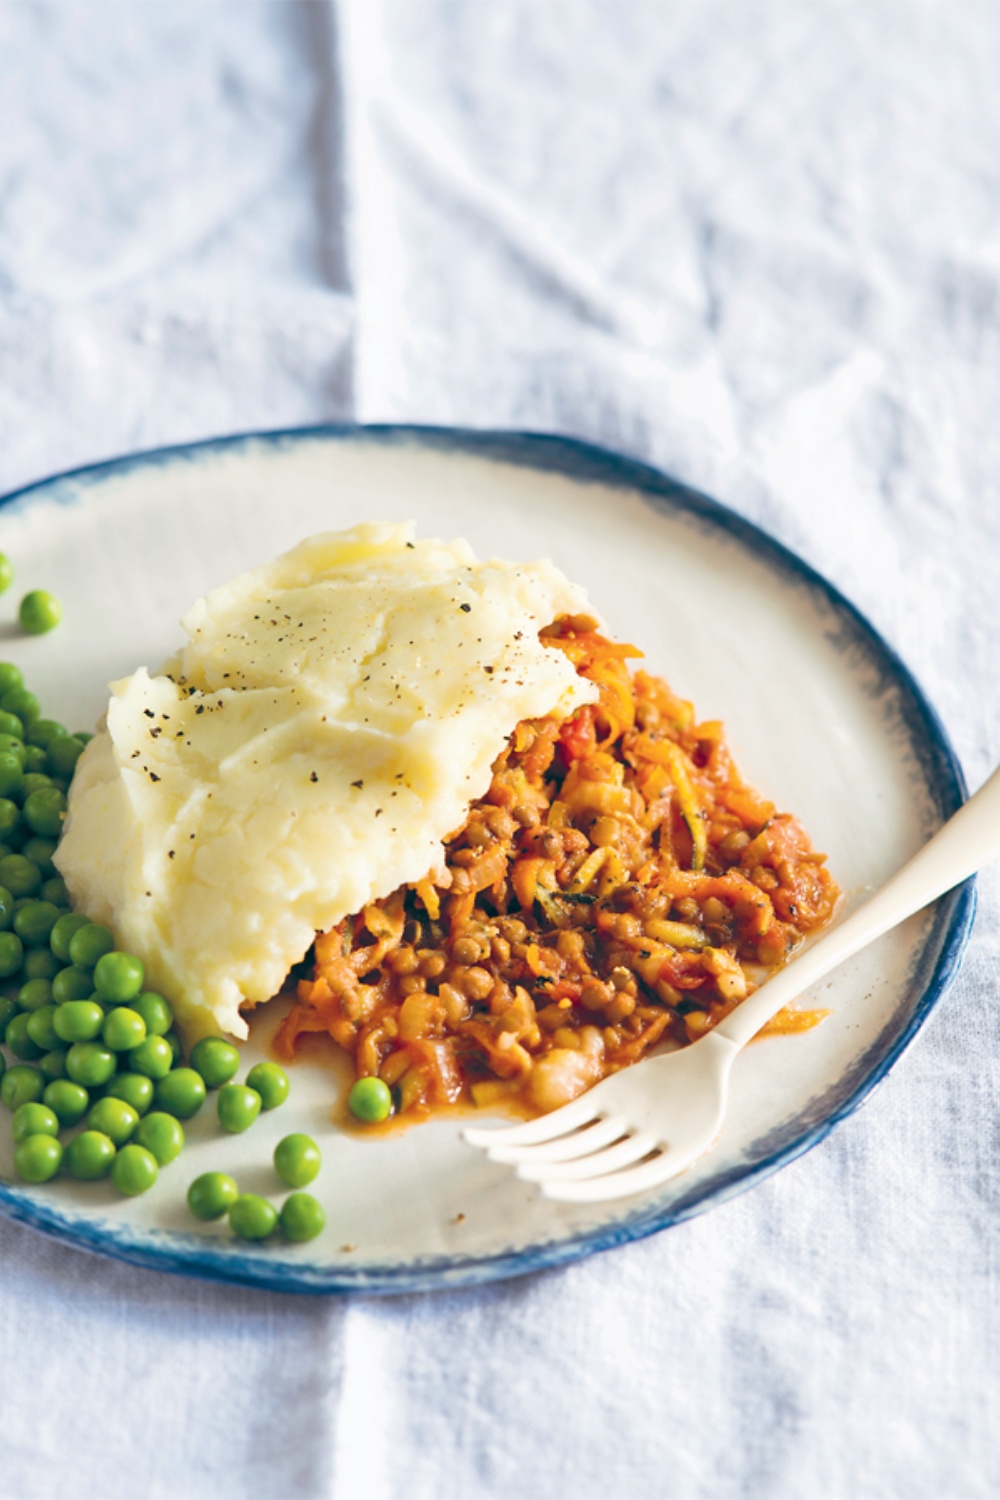 Slow Cooker Lentil Cottage Pie on a plate with mashed potatoes and green peas, served with a fork.